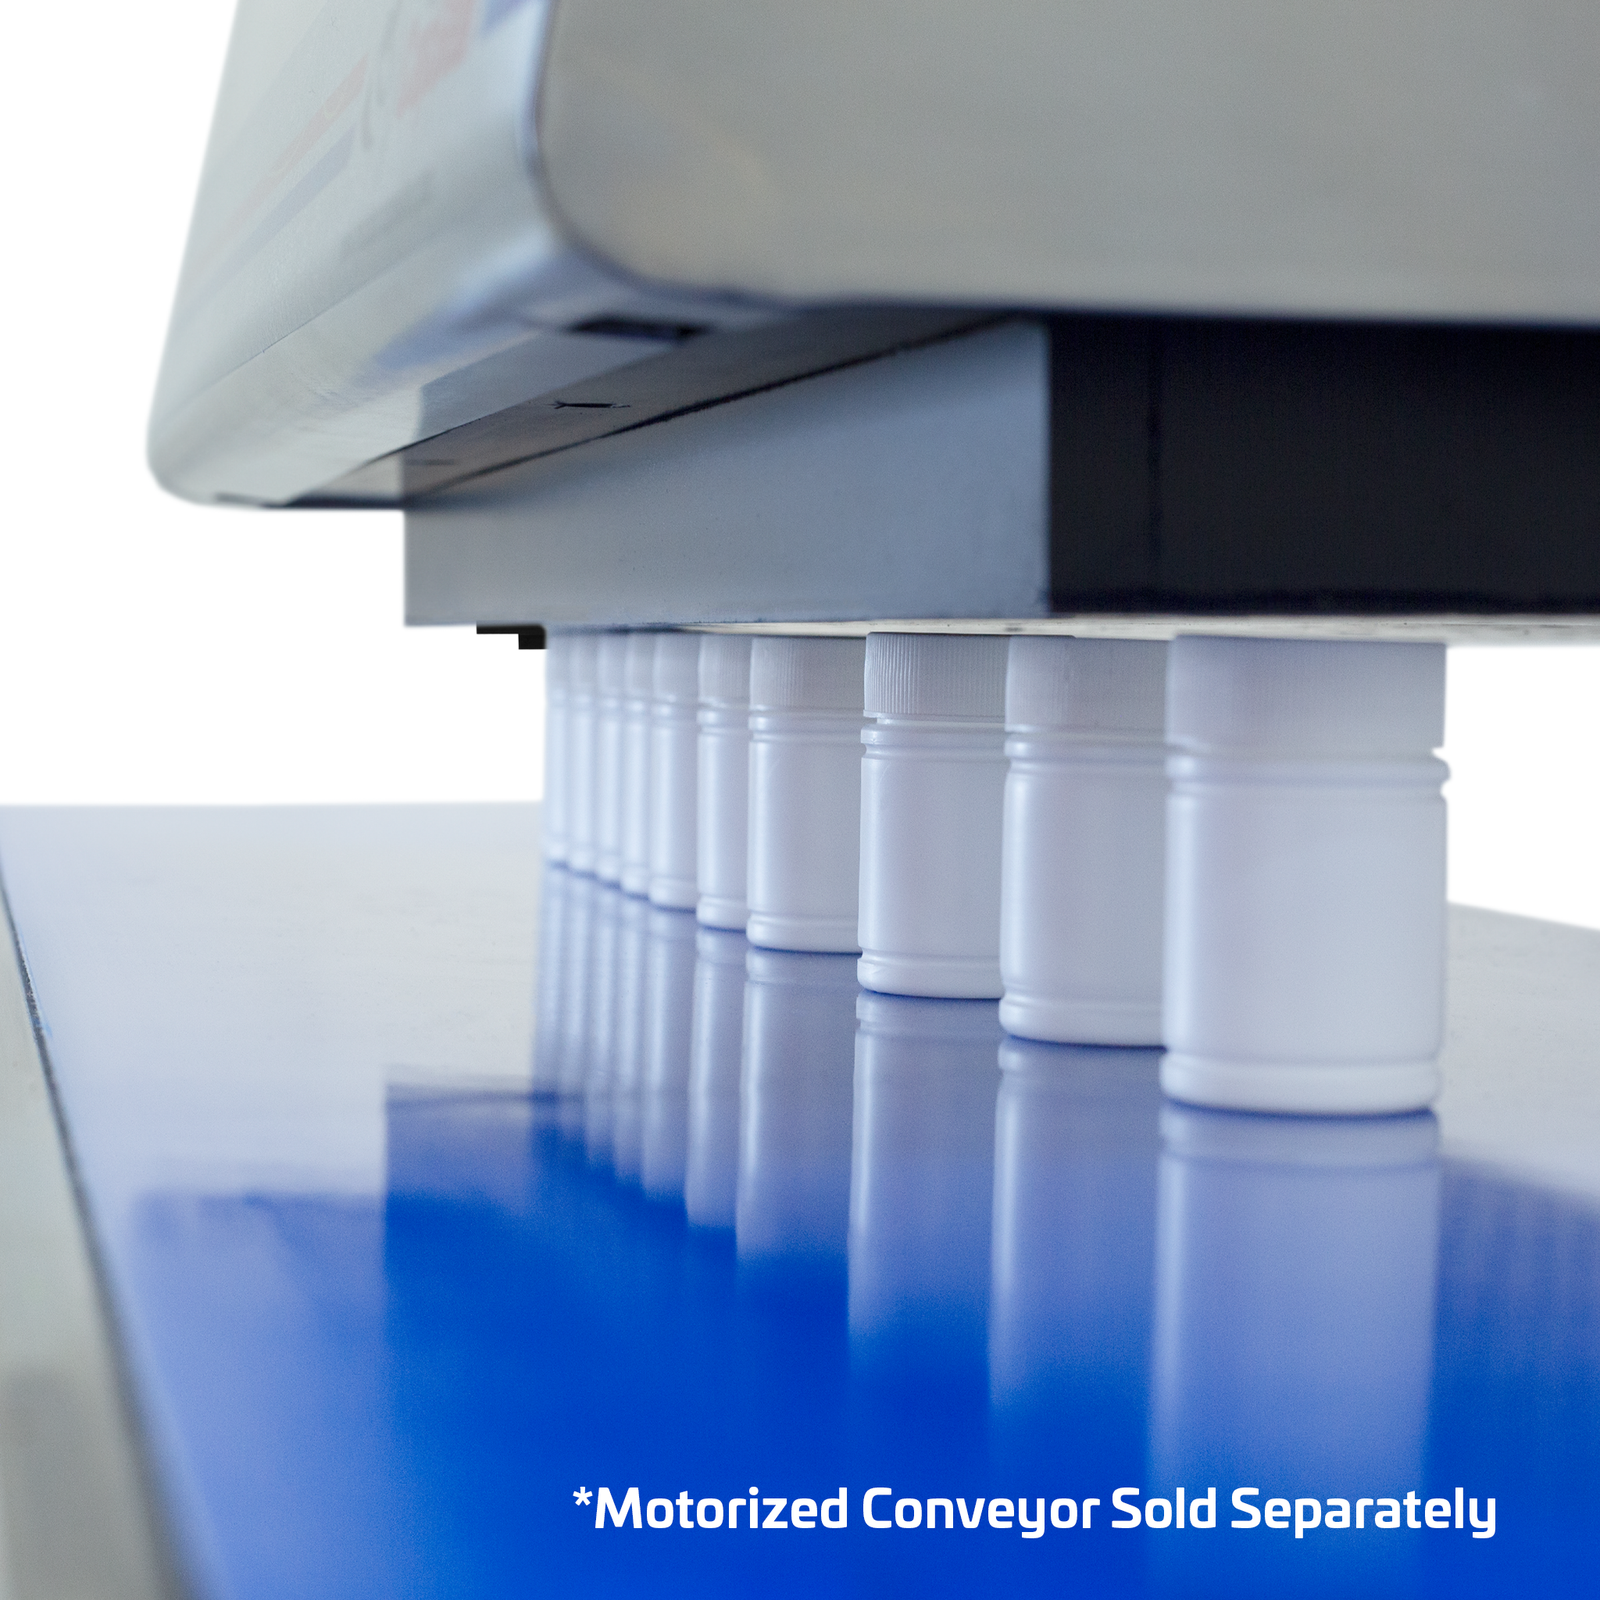 White plastic containers positioned on top of a motorized conveyor and  under the head of the Induction sealer.  The machine is producing heat to get the induction liner sealed acting as a magnetic seal. Cal out reads: Motorized conveyor sold separately